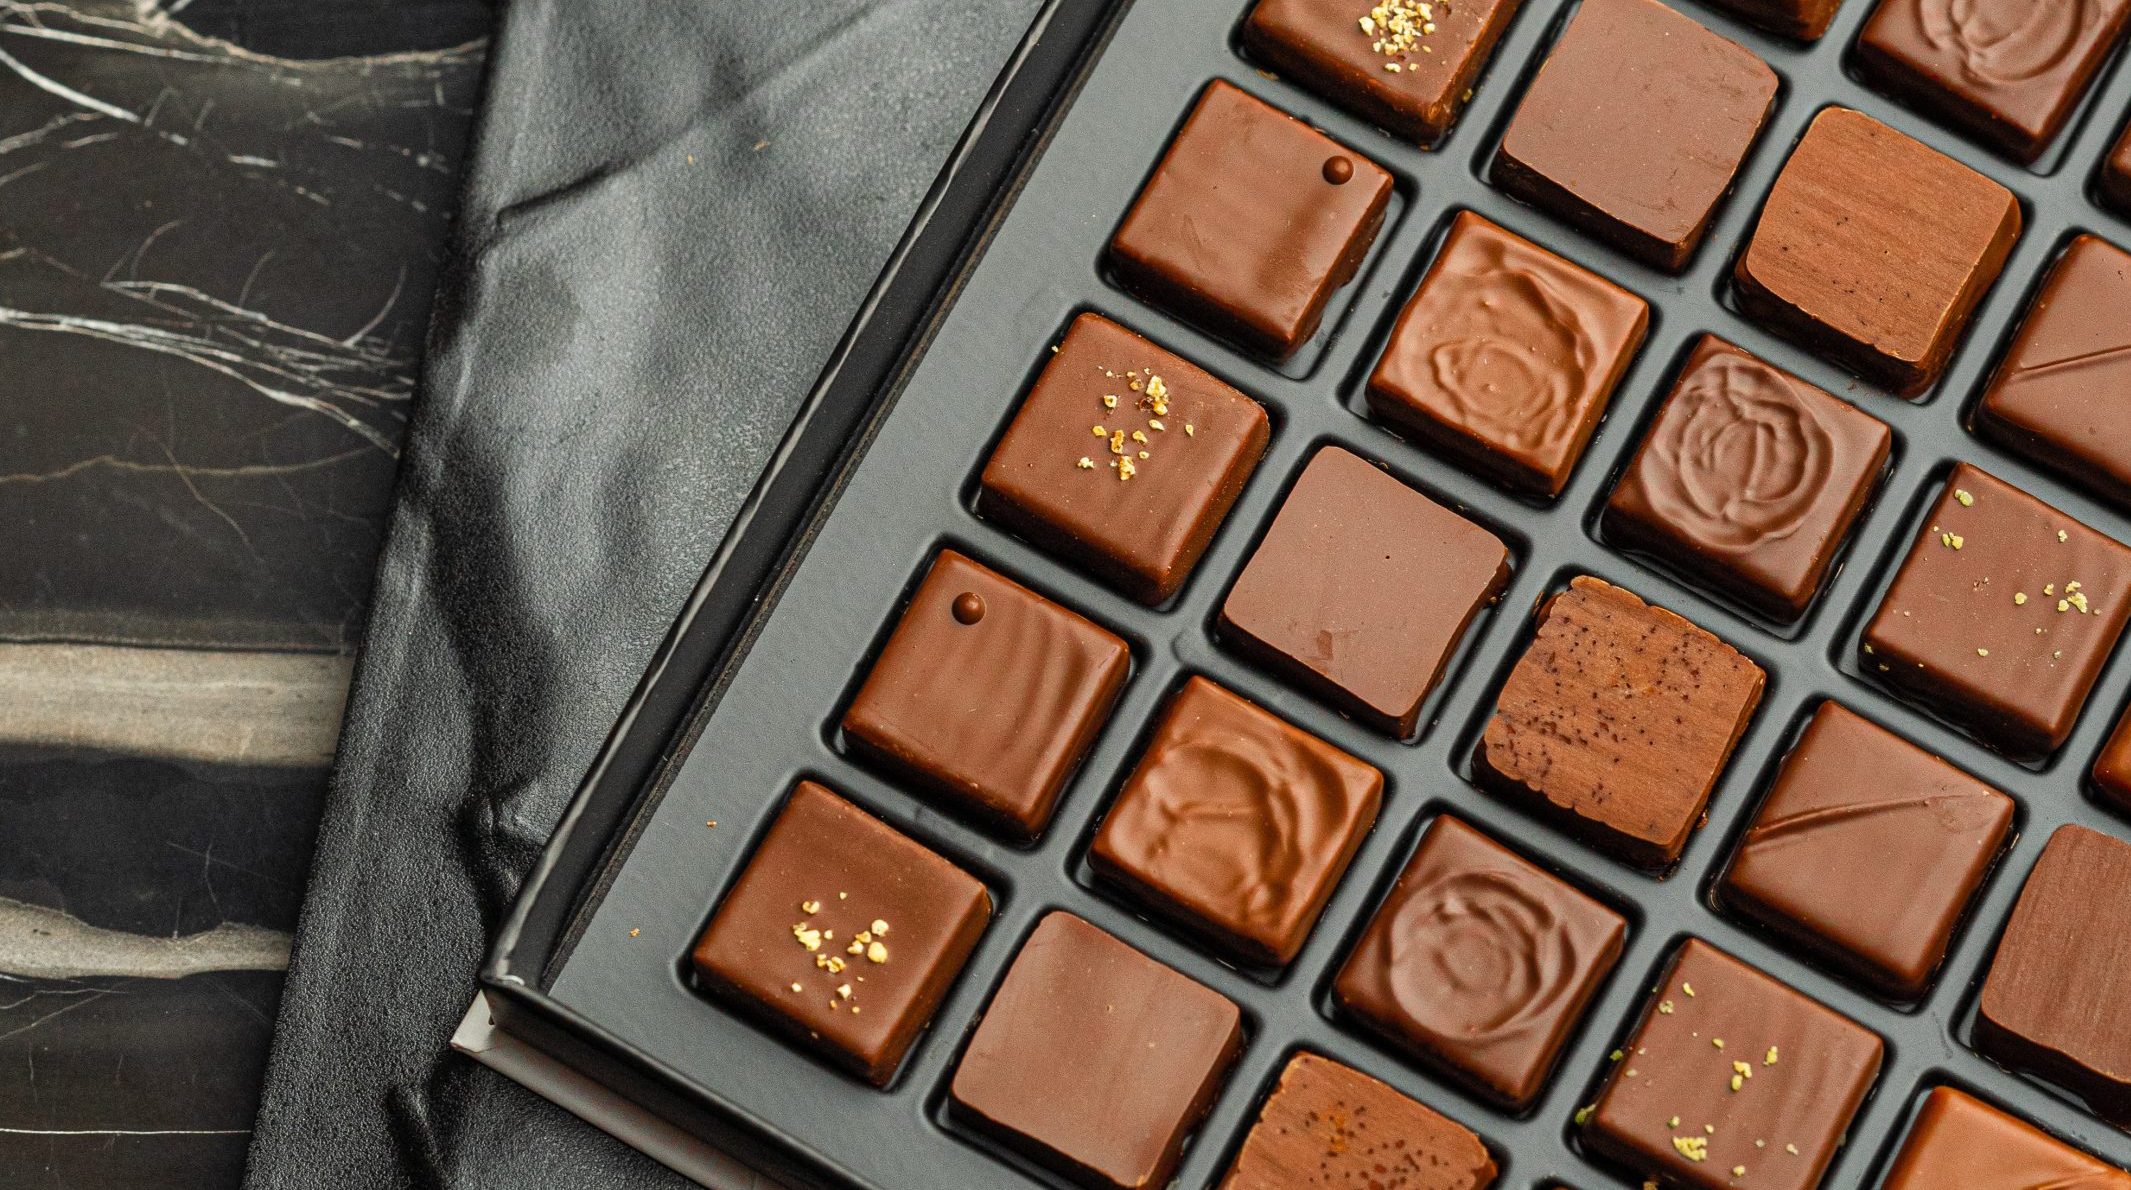 Guilty pleasure?: Scientists think they know why chocolate is addictive